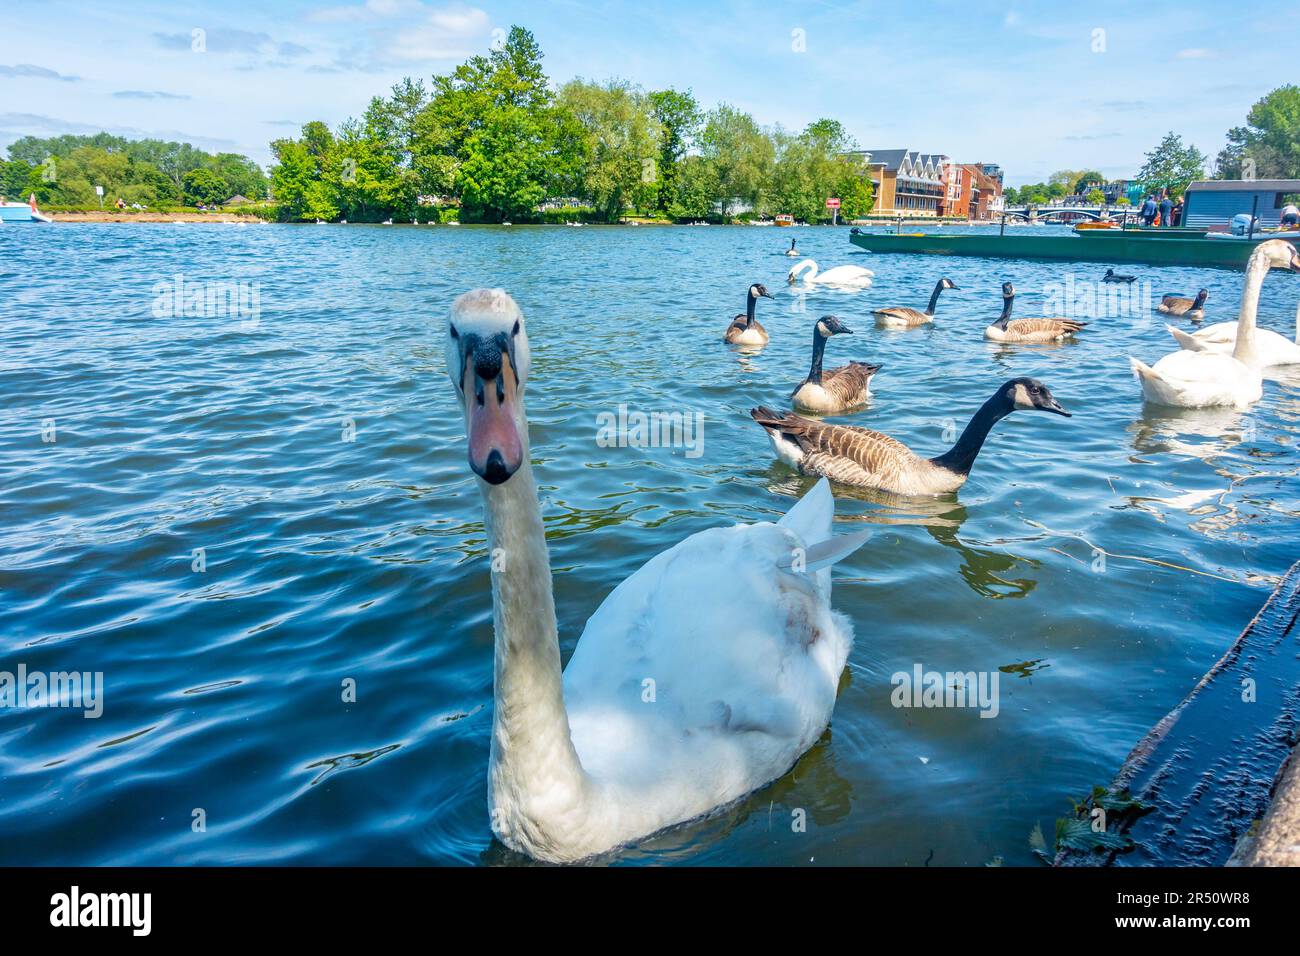 Swans and Canada geese on The River Thames at Windsor in Berkshire, UK Stock Photo